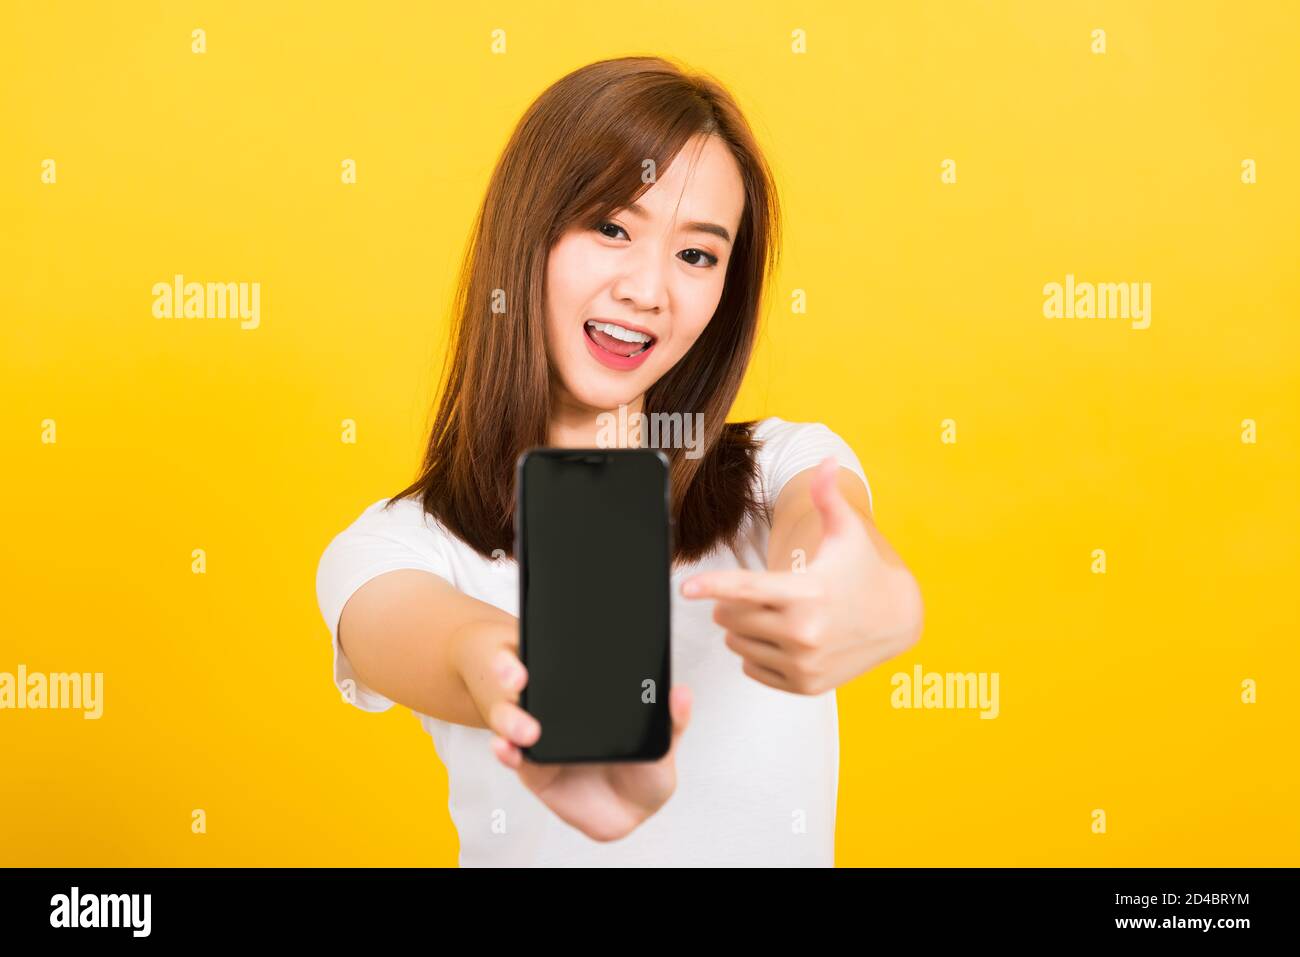 Asian happy portrait beautiful cute young woman smile standing wear t-shirt making finger pointing on smartphone blank screen looking to phone isolate Stock Photo